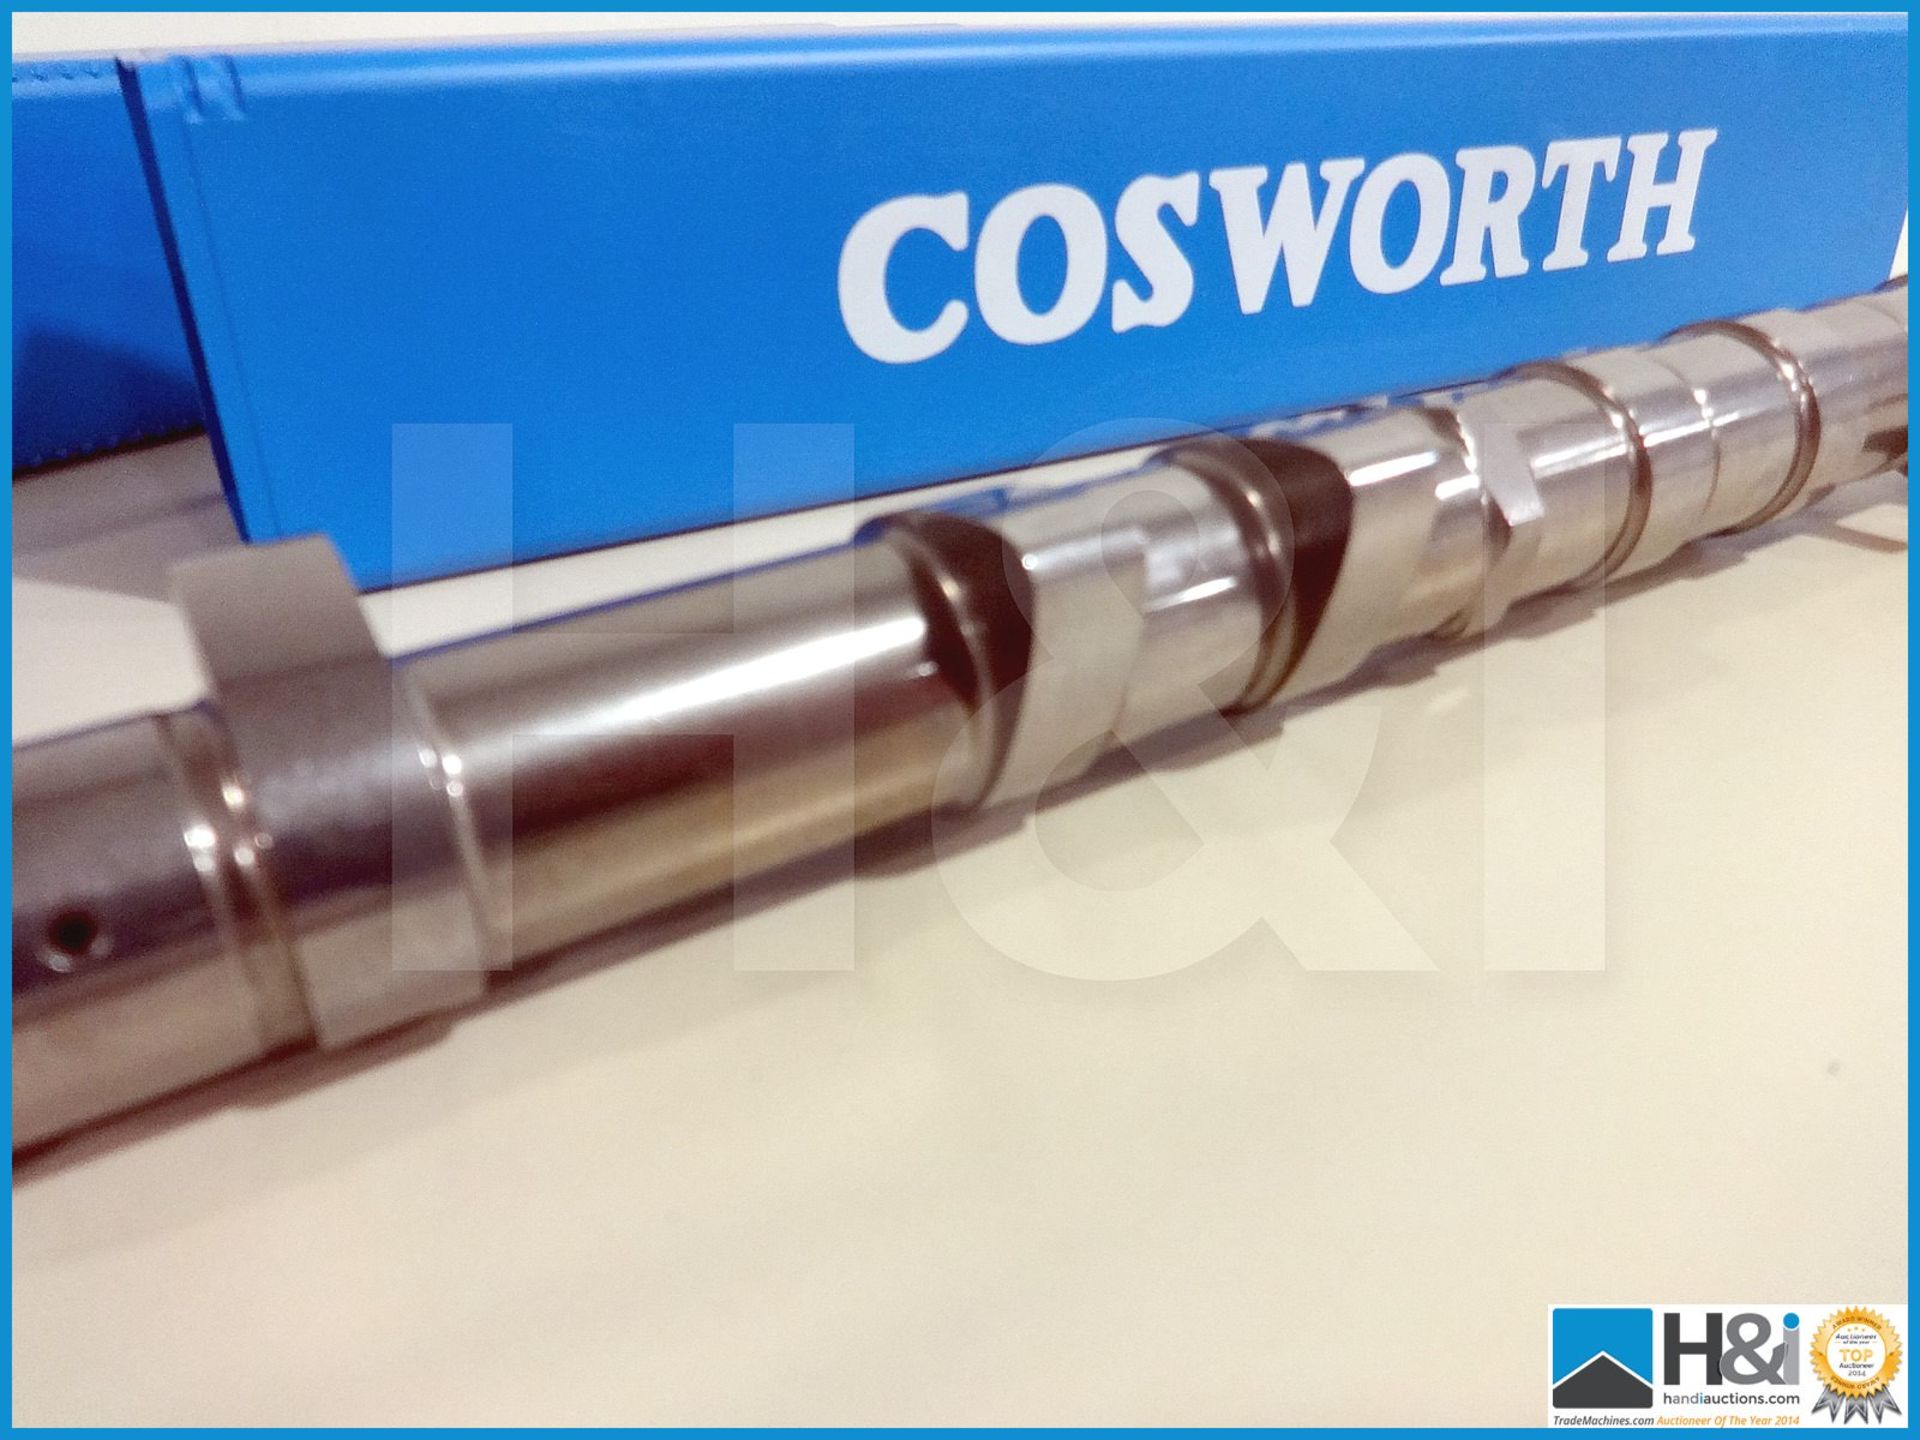 4 off exhaust camshaft Kawasaki ZX10R suit 2009 engine. Suggested manufacturers selling price GBP 15 - Image 2 of 4